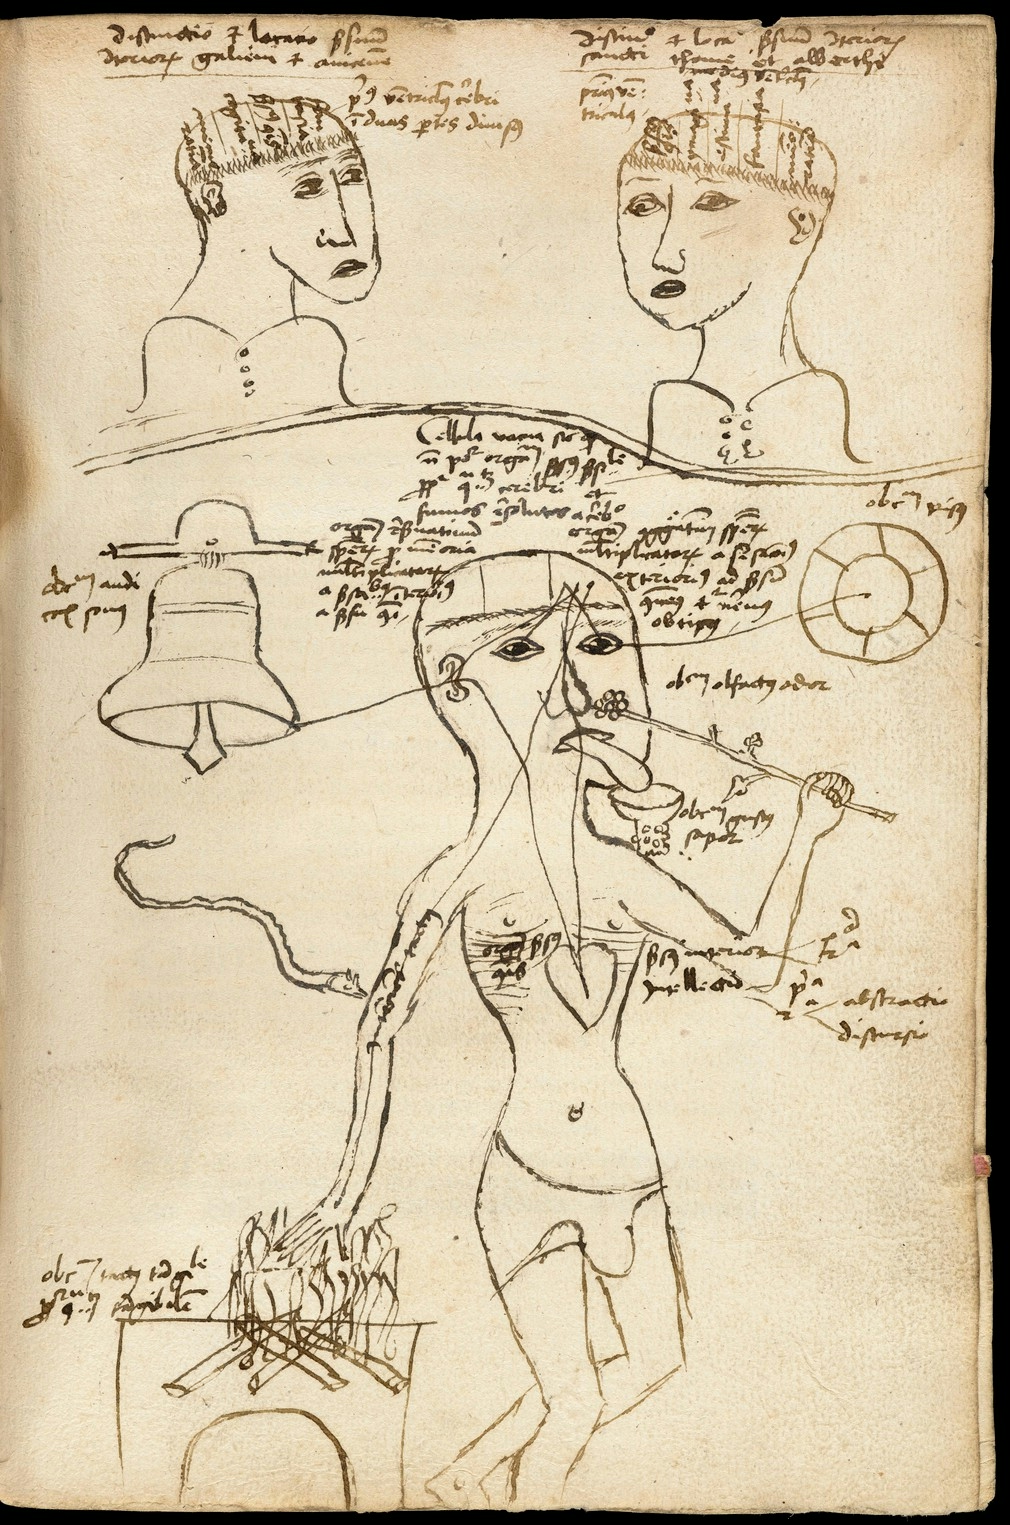 Image of parchment with loose ink drawings of two human heads at the top and a full body below with labels and text